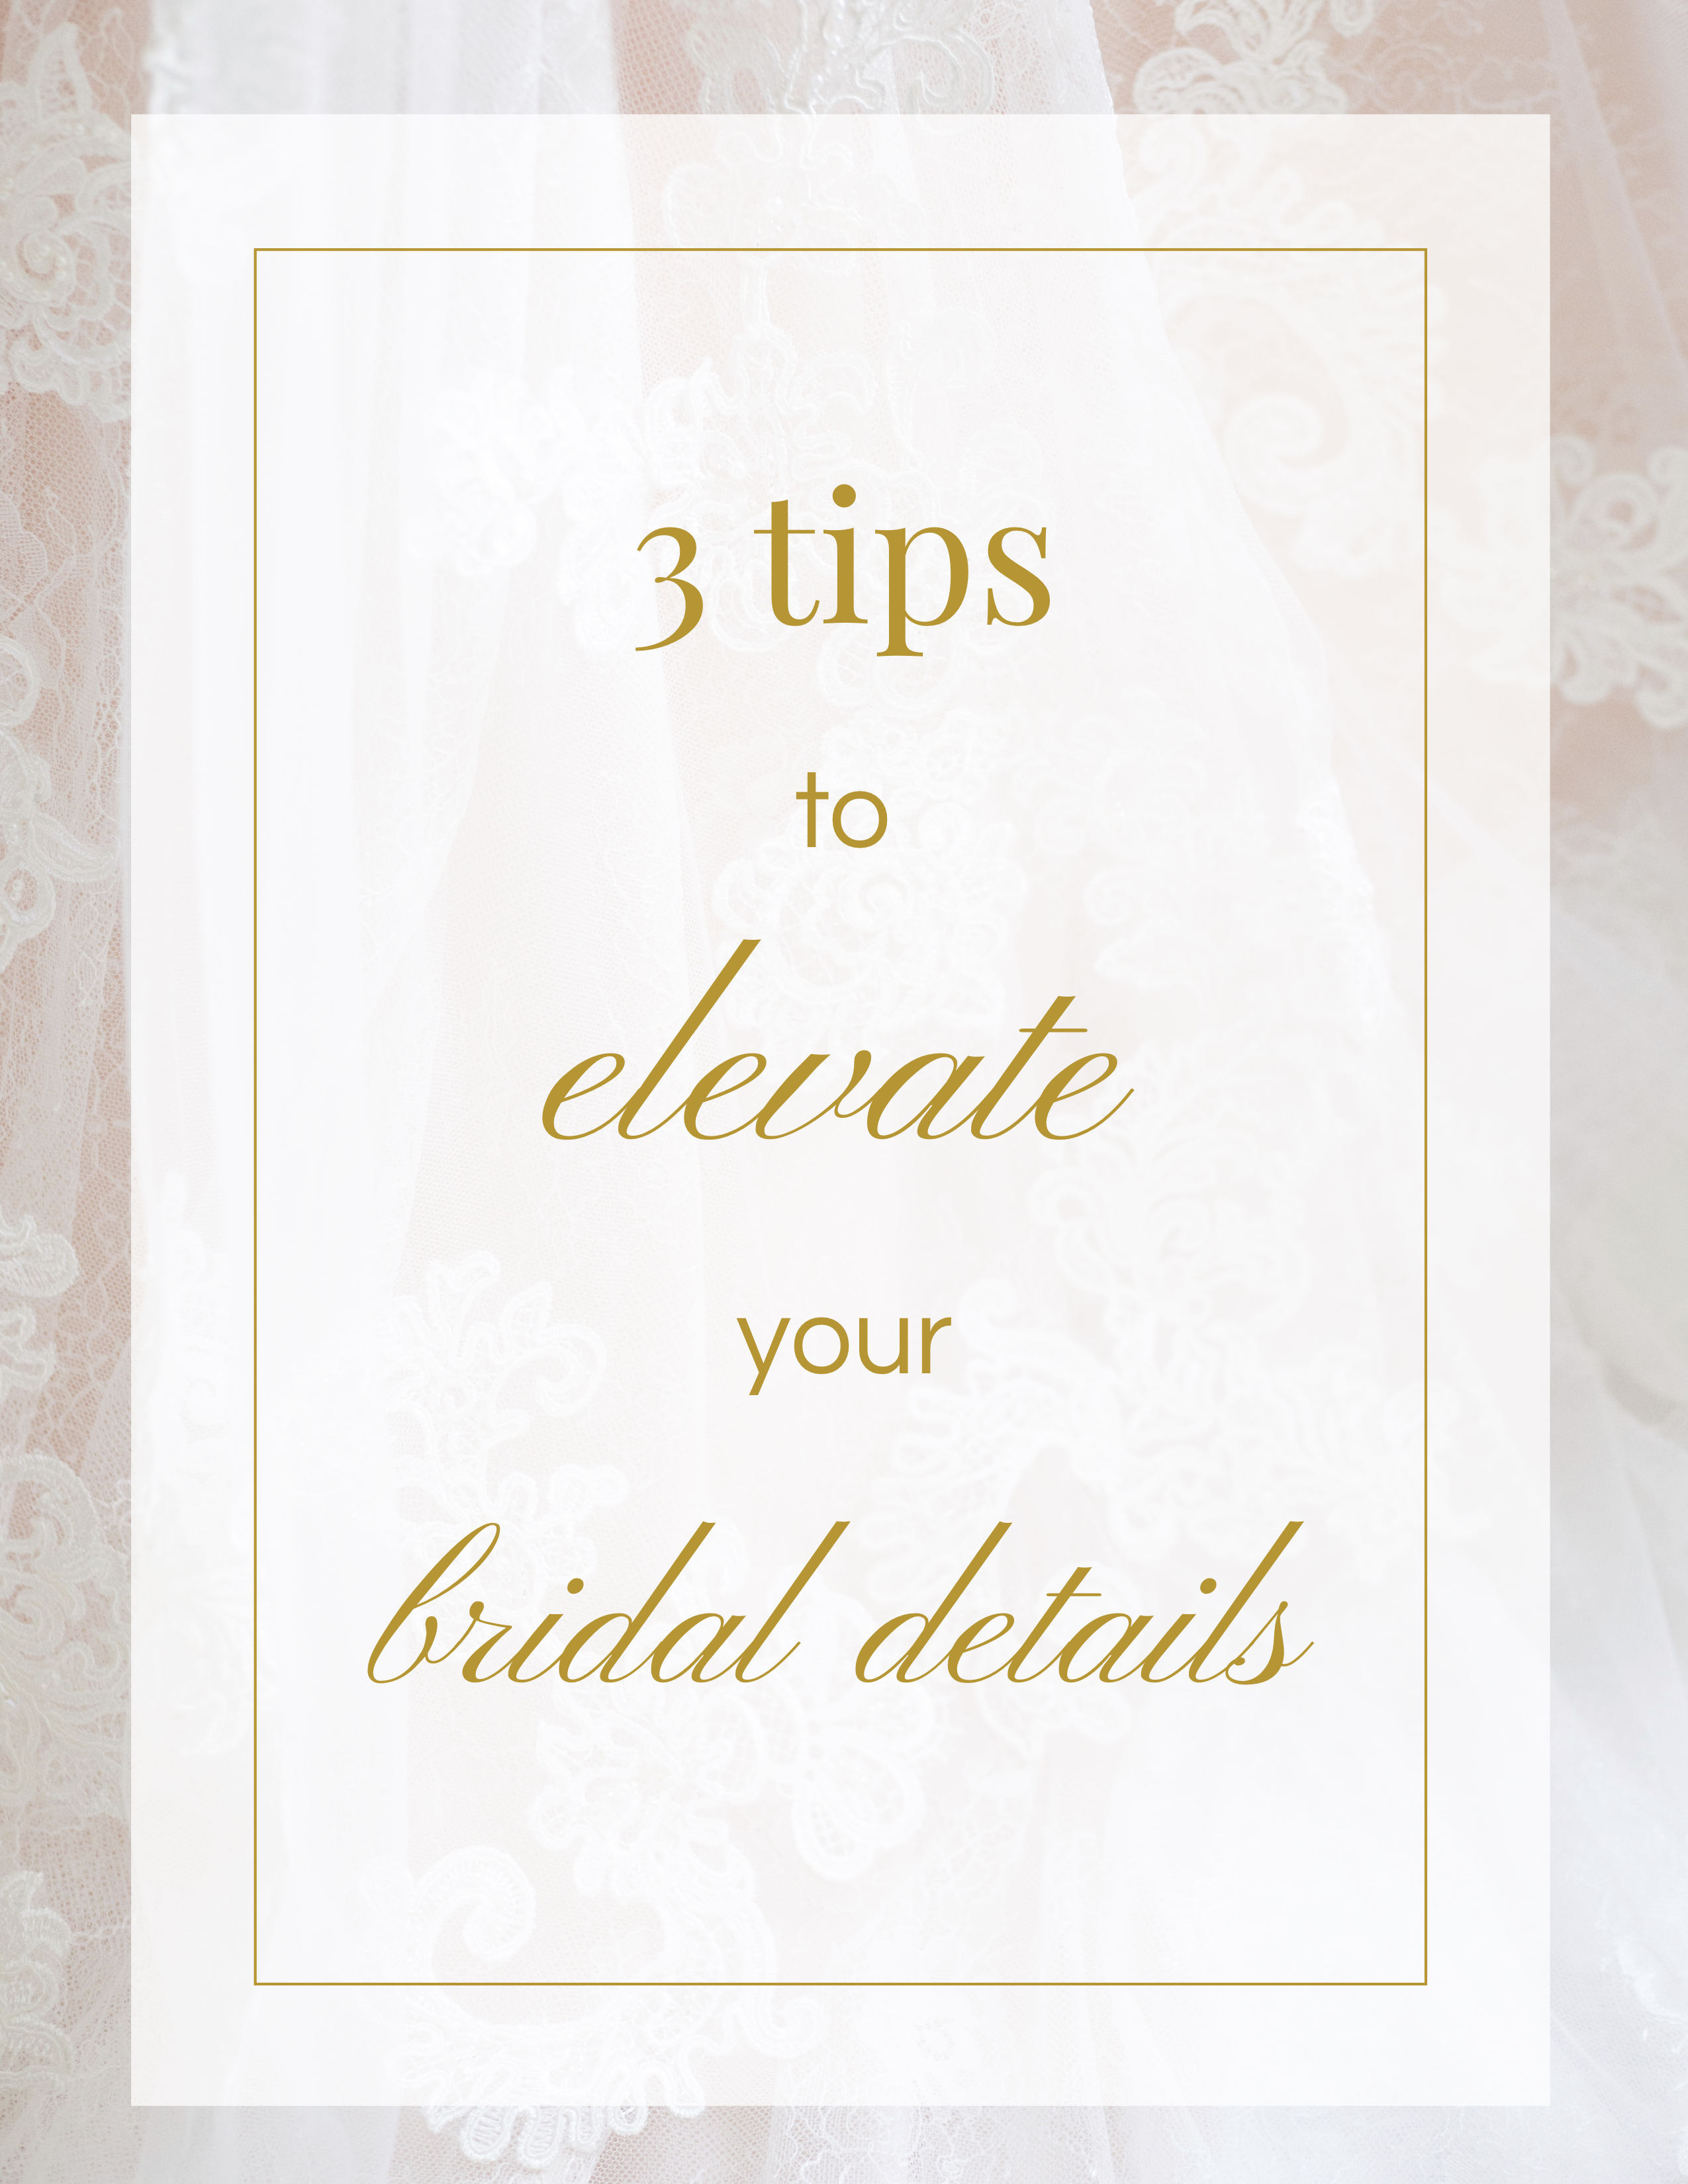 3-tips-to-elevate-bridal-detail-photos